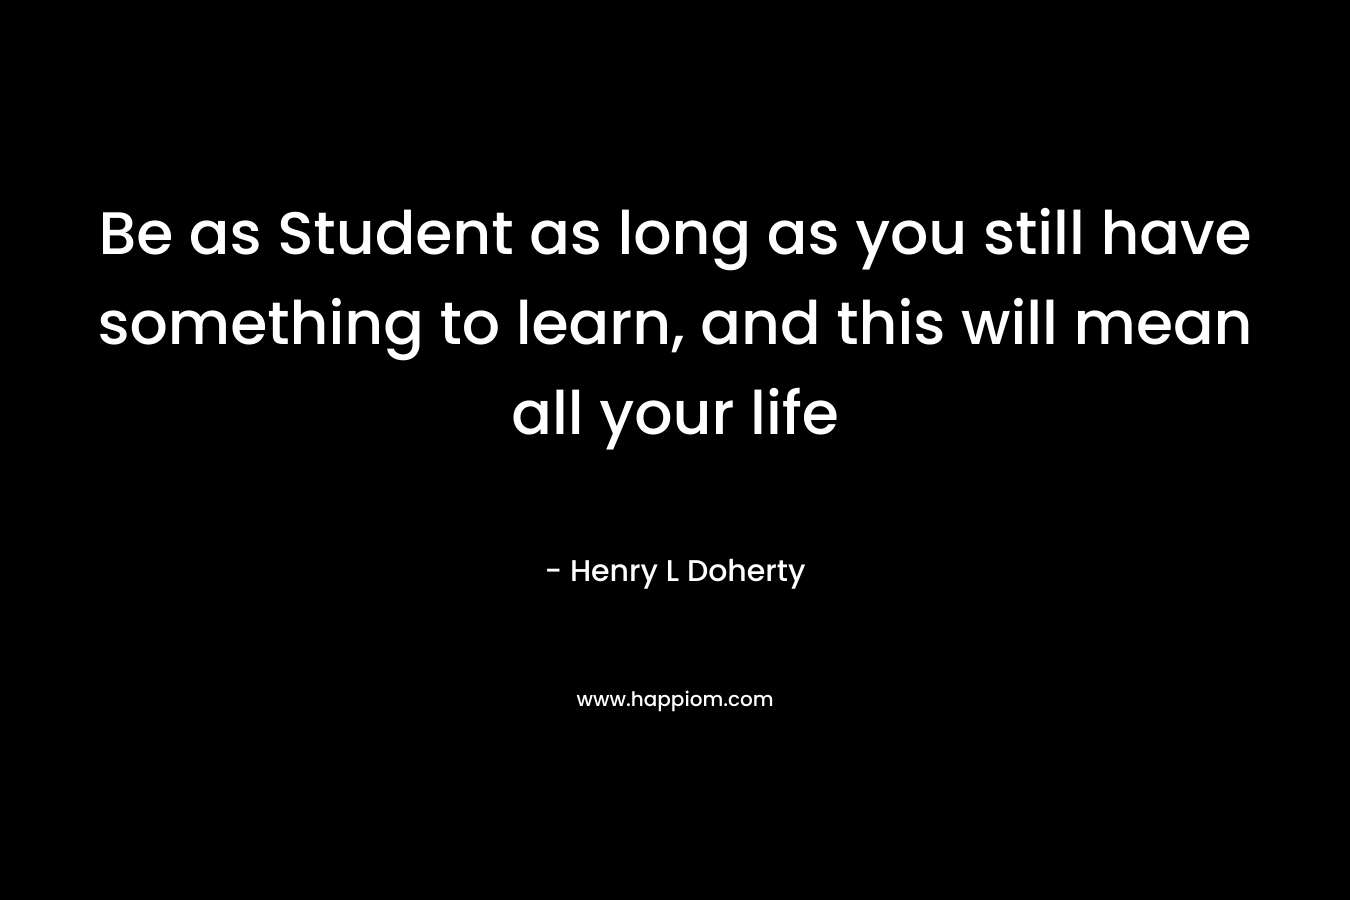 Be as Student as long as you still have something to learn, and this will mean all your life – Henry L Doherty